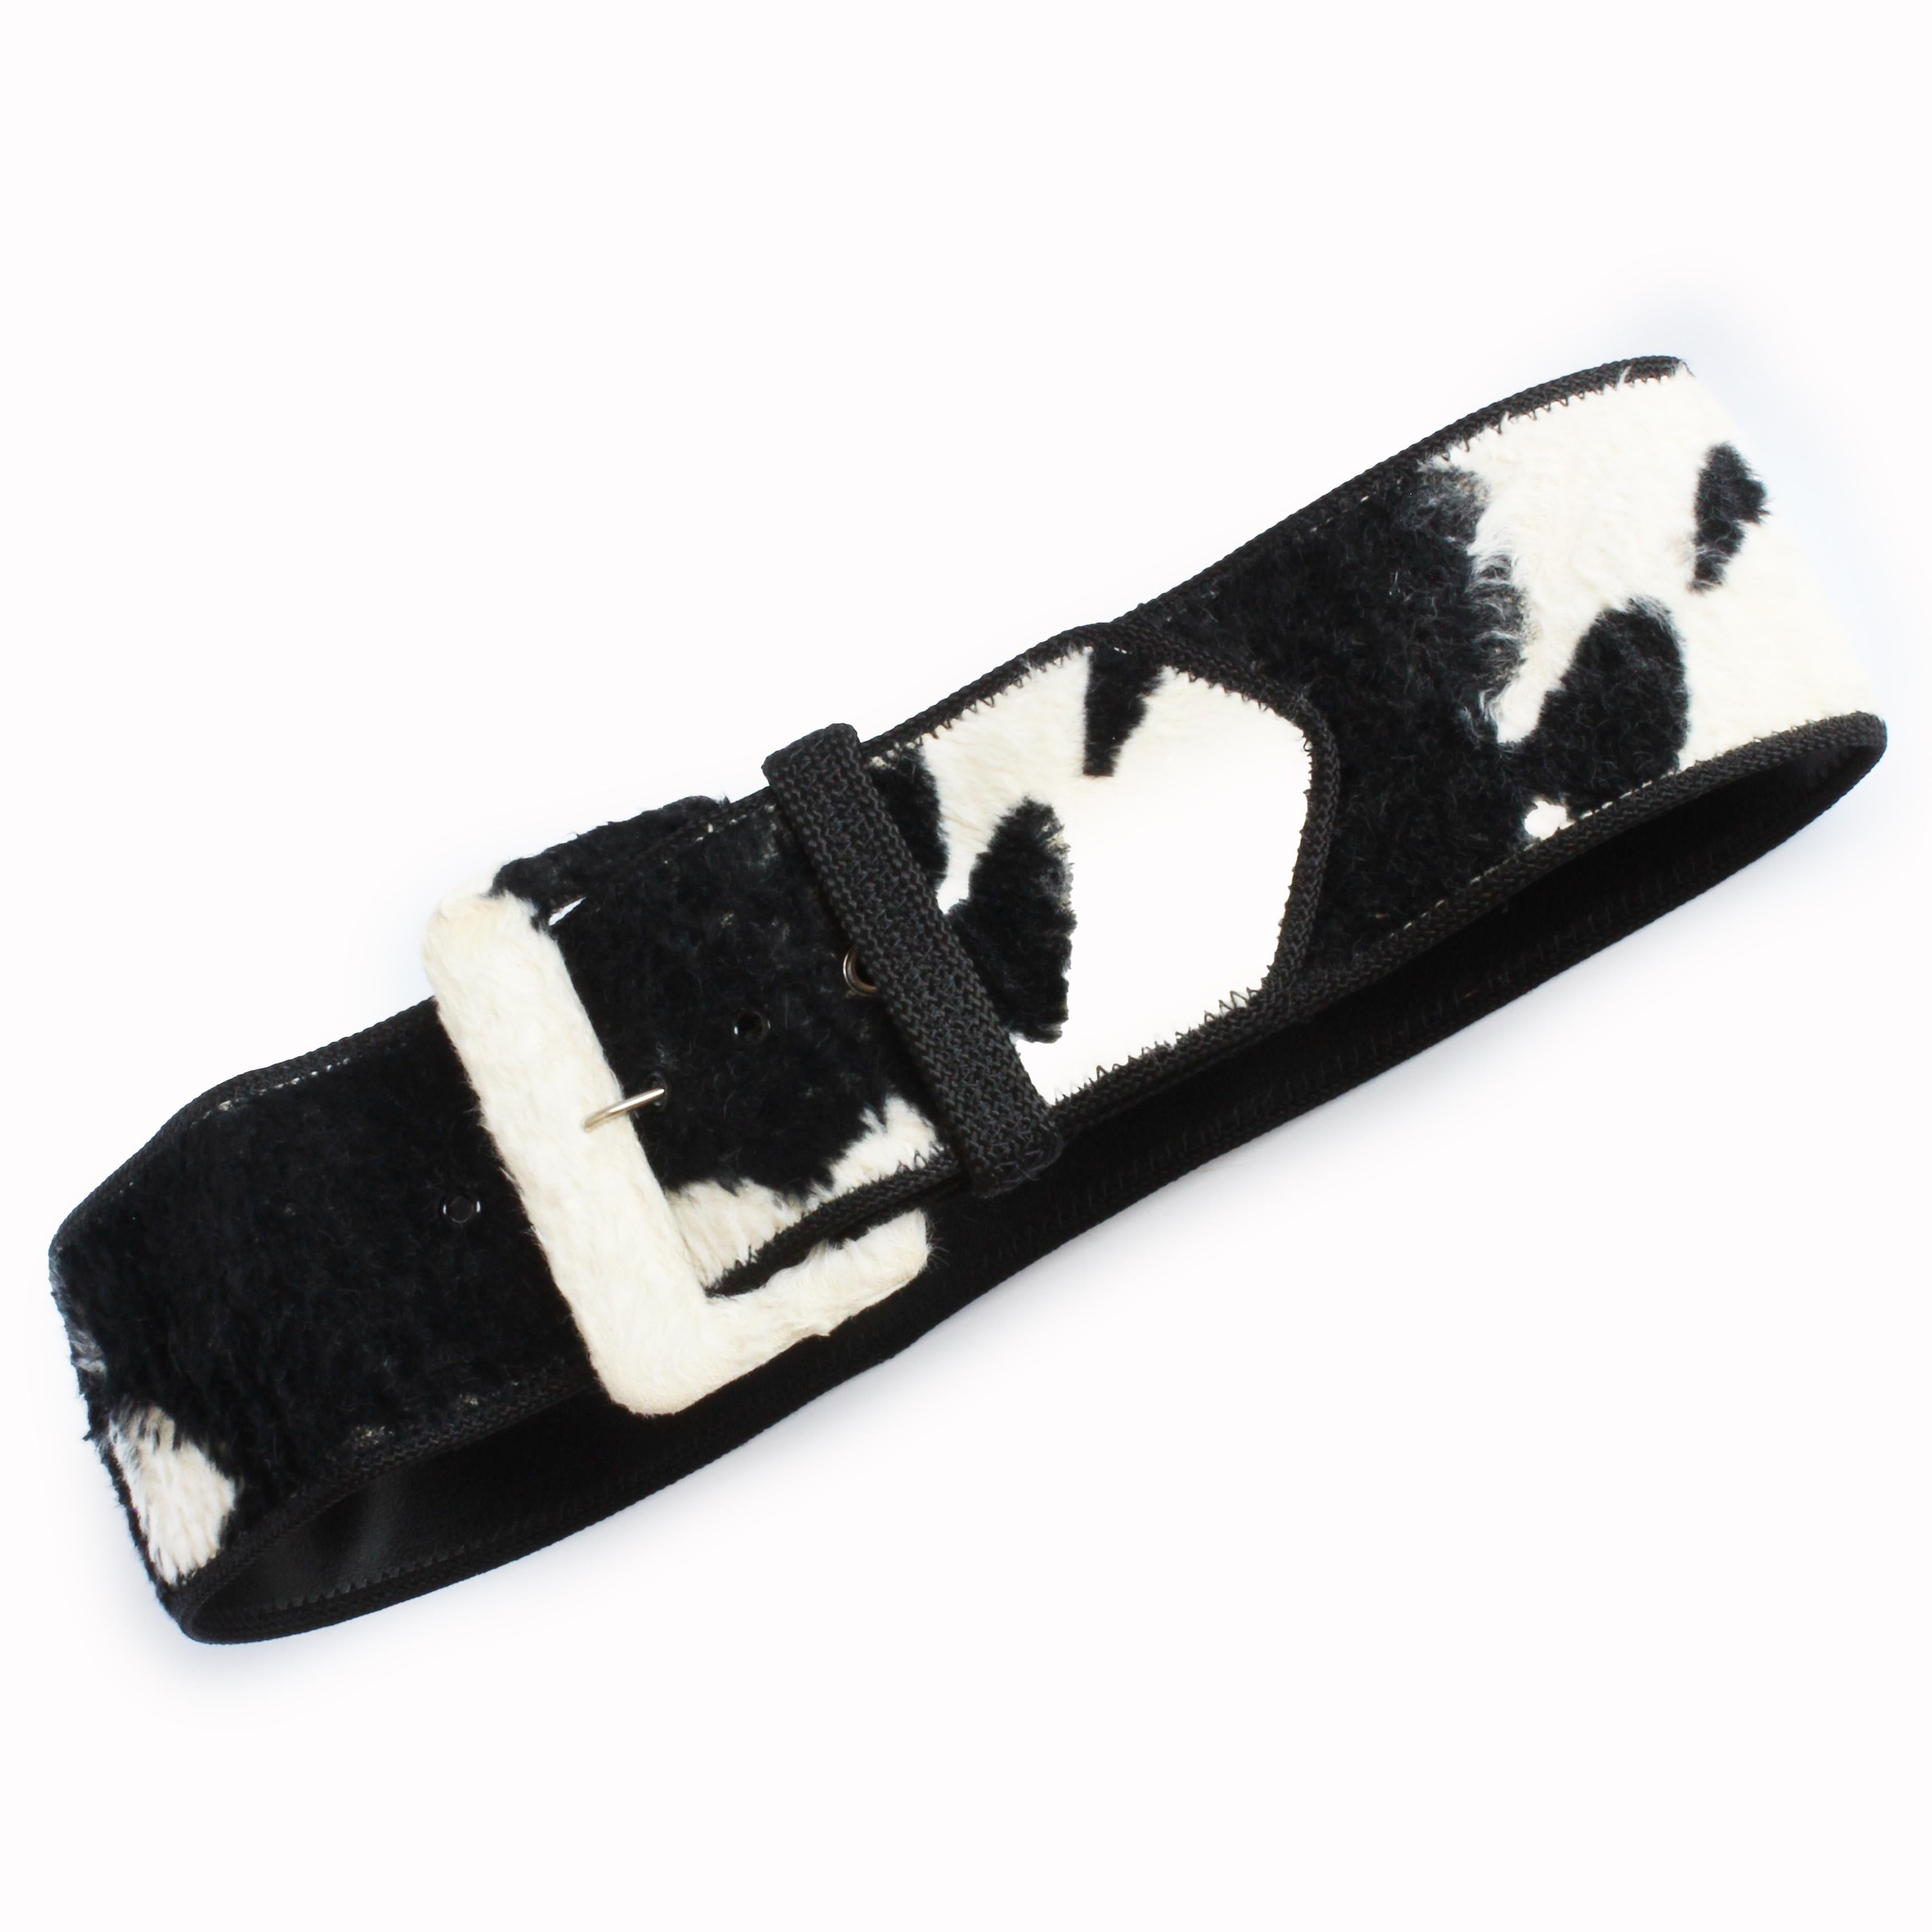 Preowned, vintage Norma Kamali OMO wide belt, likely made in the early 90s.  Backed in leather, this belt features a black and white faux fur cow print throughout! 

Retro fabulous and fun - and so easy to wear and style.

Approximate measurements: